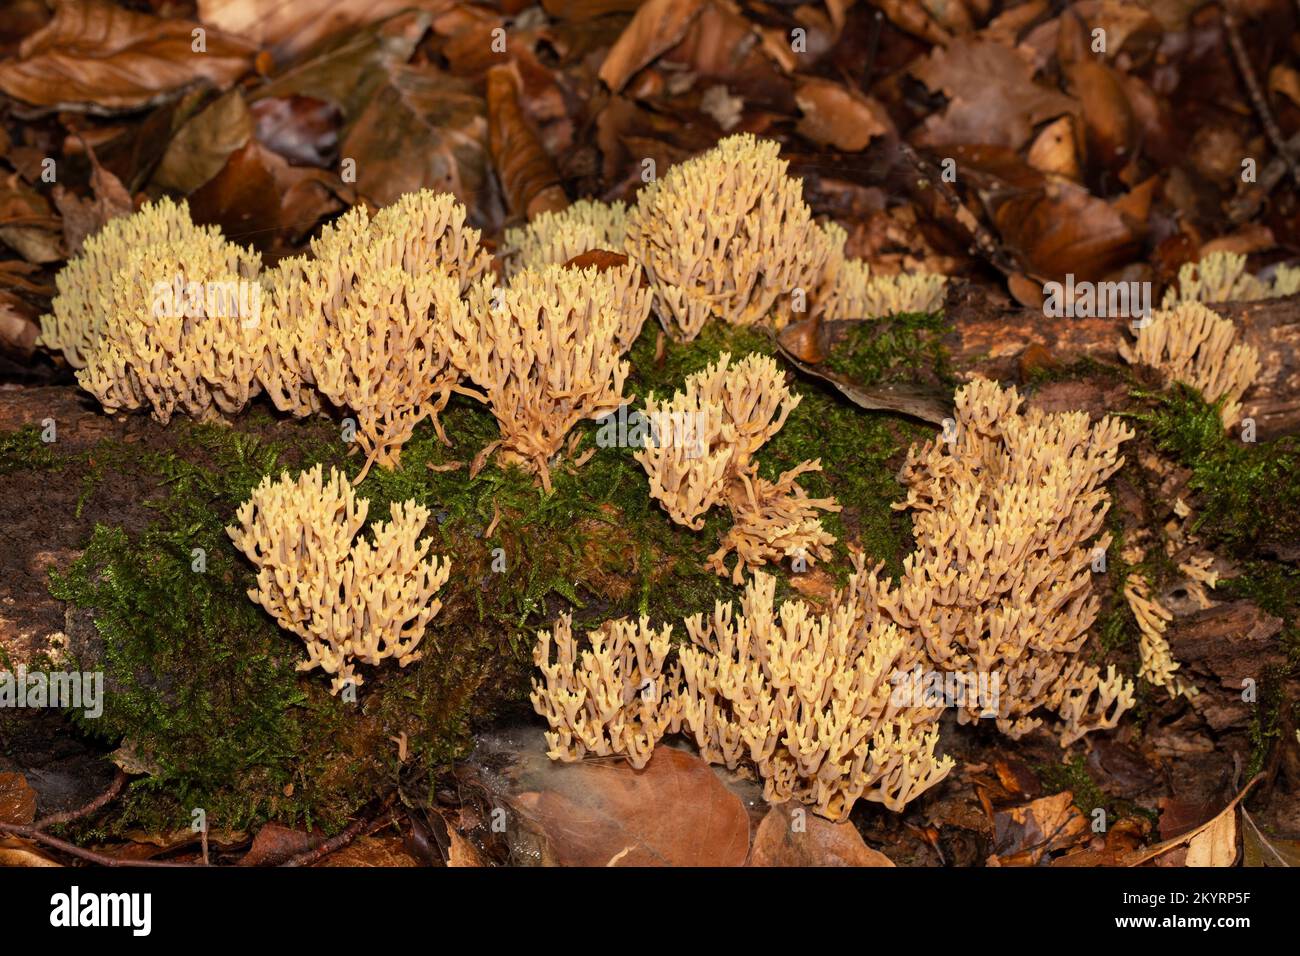 Stiff coral many fruiting bodies with many ochre-yellow branches on tree trunk with green moss Stock Photo